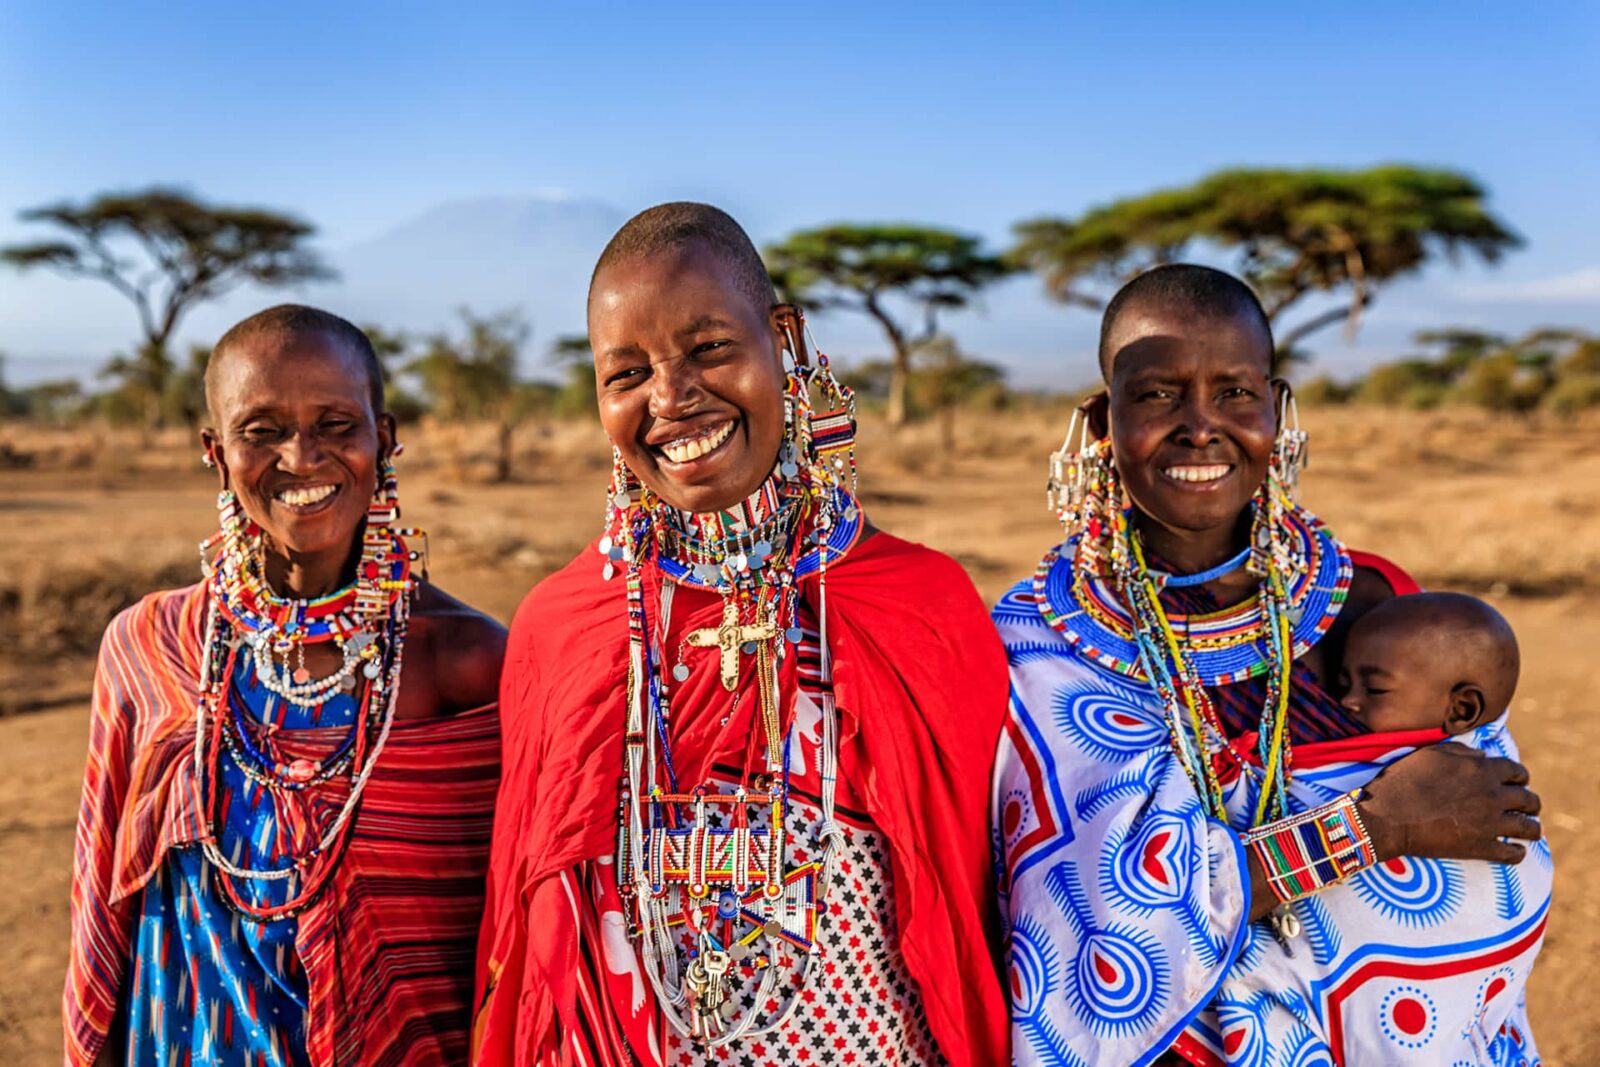 About Maasai traditions and customs